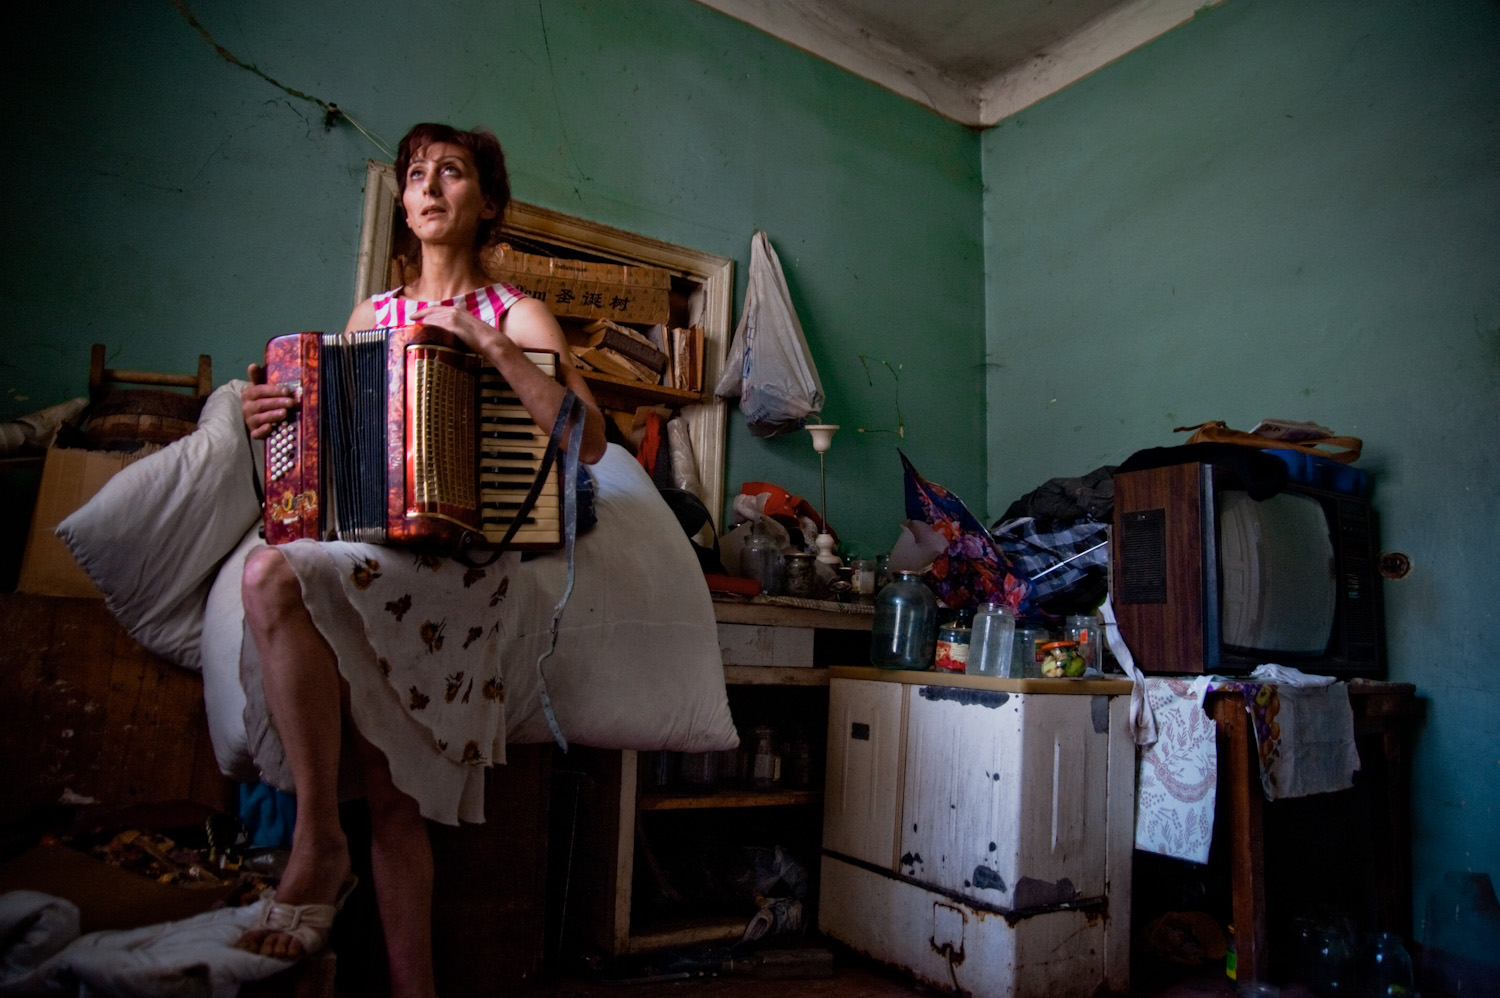  Narine with the accordion she once played as a girl. With her 4 children, she escaped an abusive, alcoholic husband who regularly beat and raped her. The family now lives in this dilapidated house in Arinch village.  